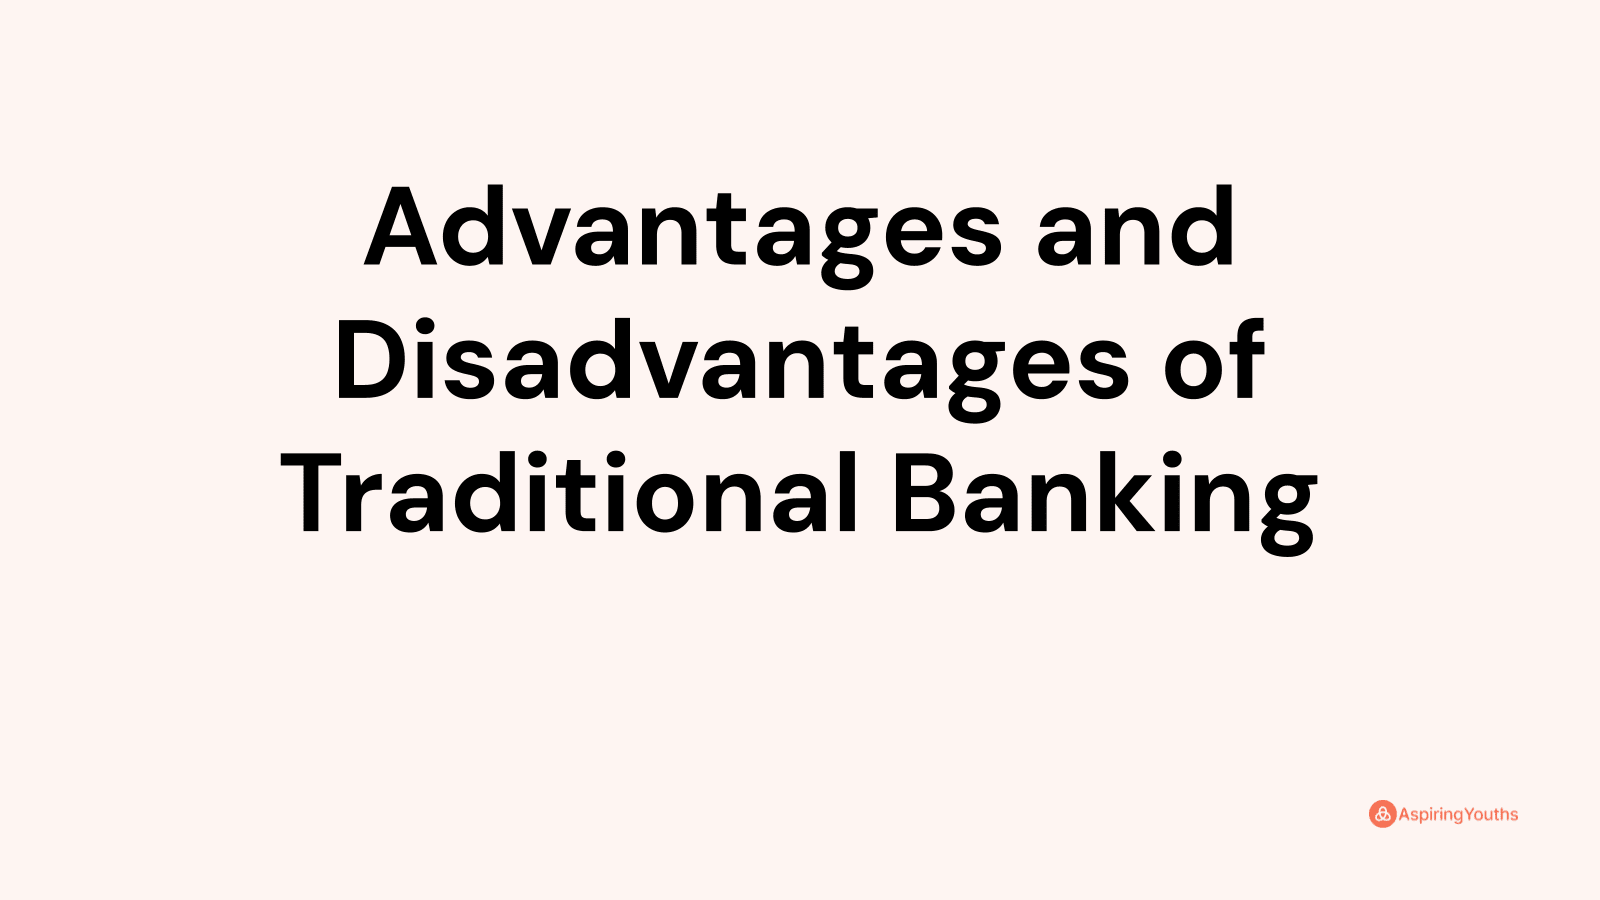 Advantages and disadvantages of Traditional Banking